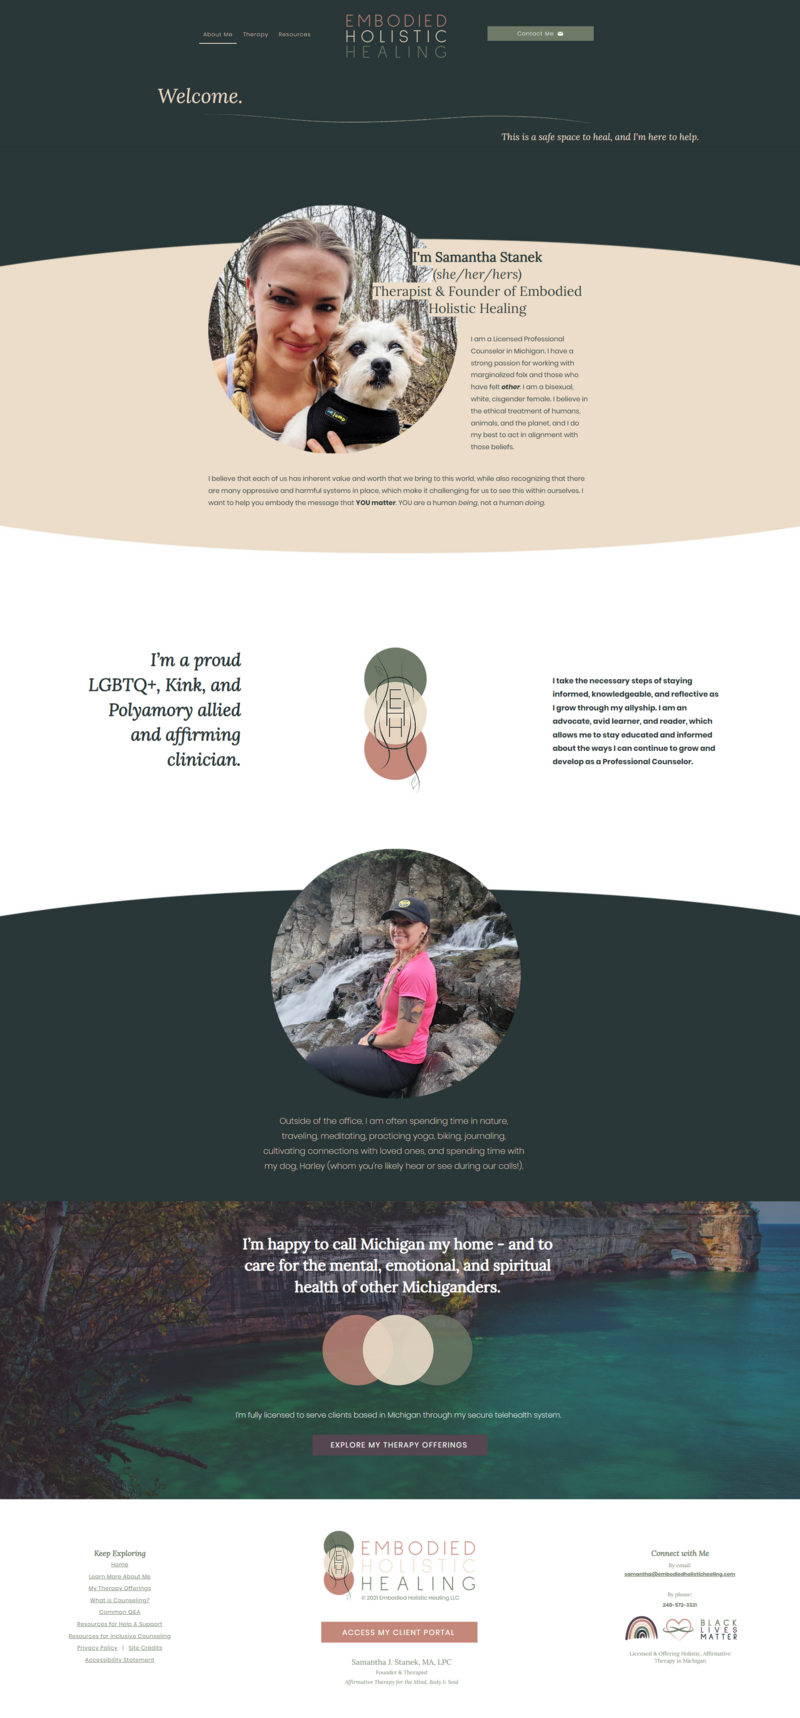 This image shows a screen capture of a section of the Embodied Holistic Healing "About Me" page. This section highlights Samantha's work with the text: "I'm a proud, LGBTQ+, Kink, and Polyamory allied and affirming clinician," paired with her submark logo and photo of her on a hike.